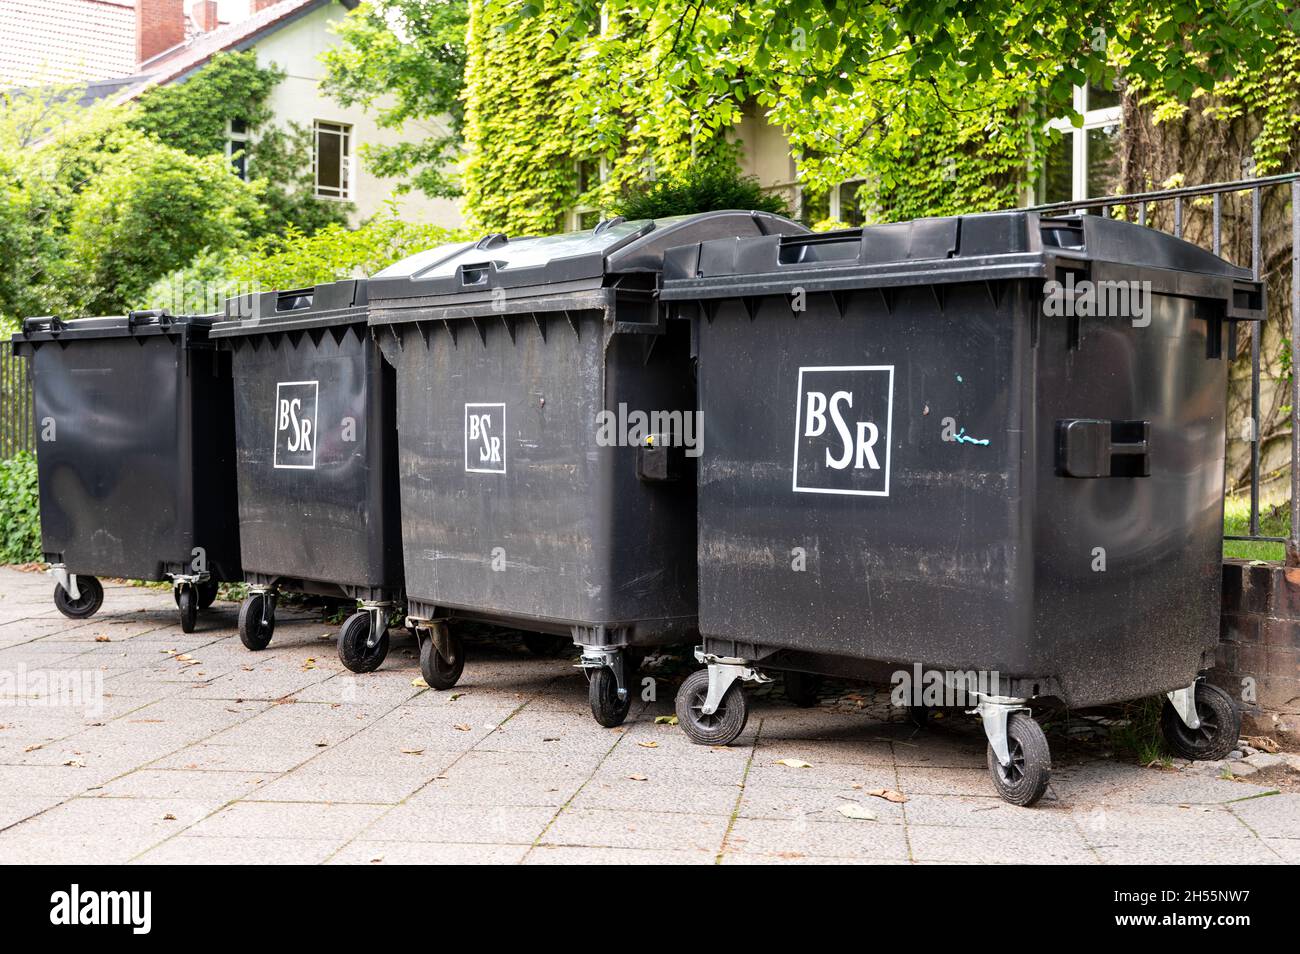 four rubbish bins from the BSR. BSR is the Berlin city cleaning service Stock Photo